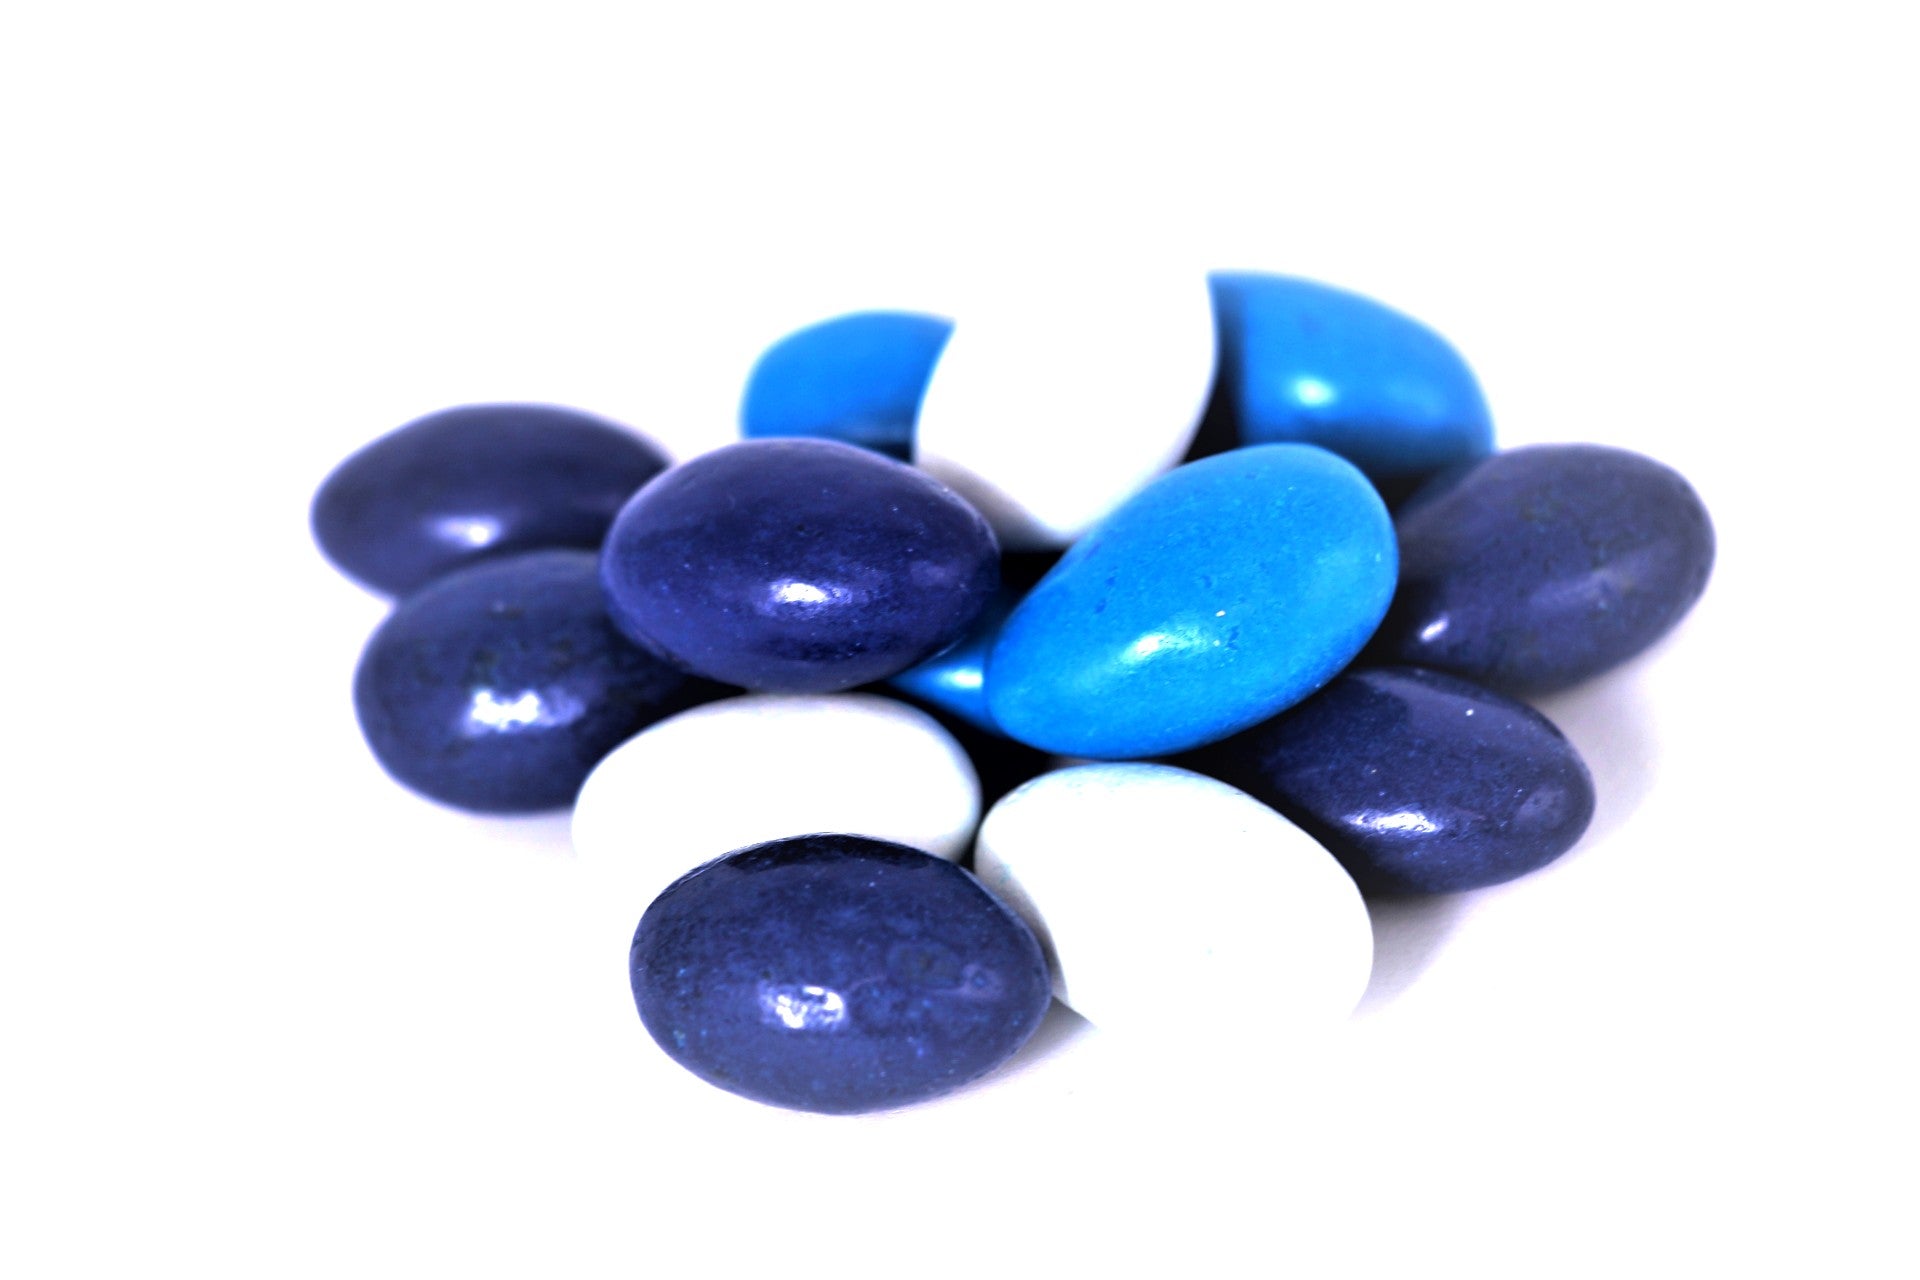 blue and white candy